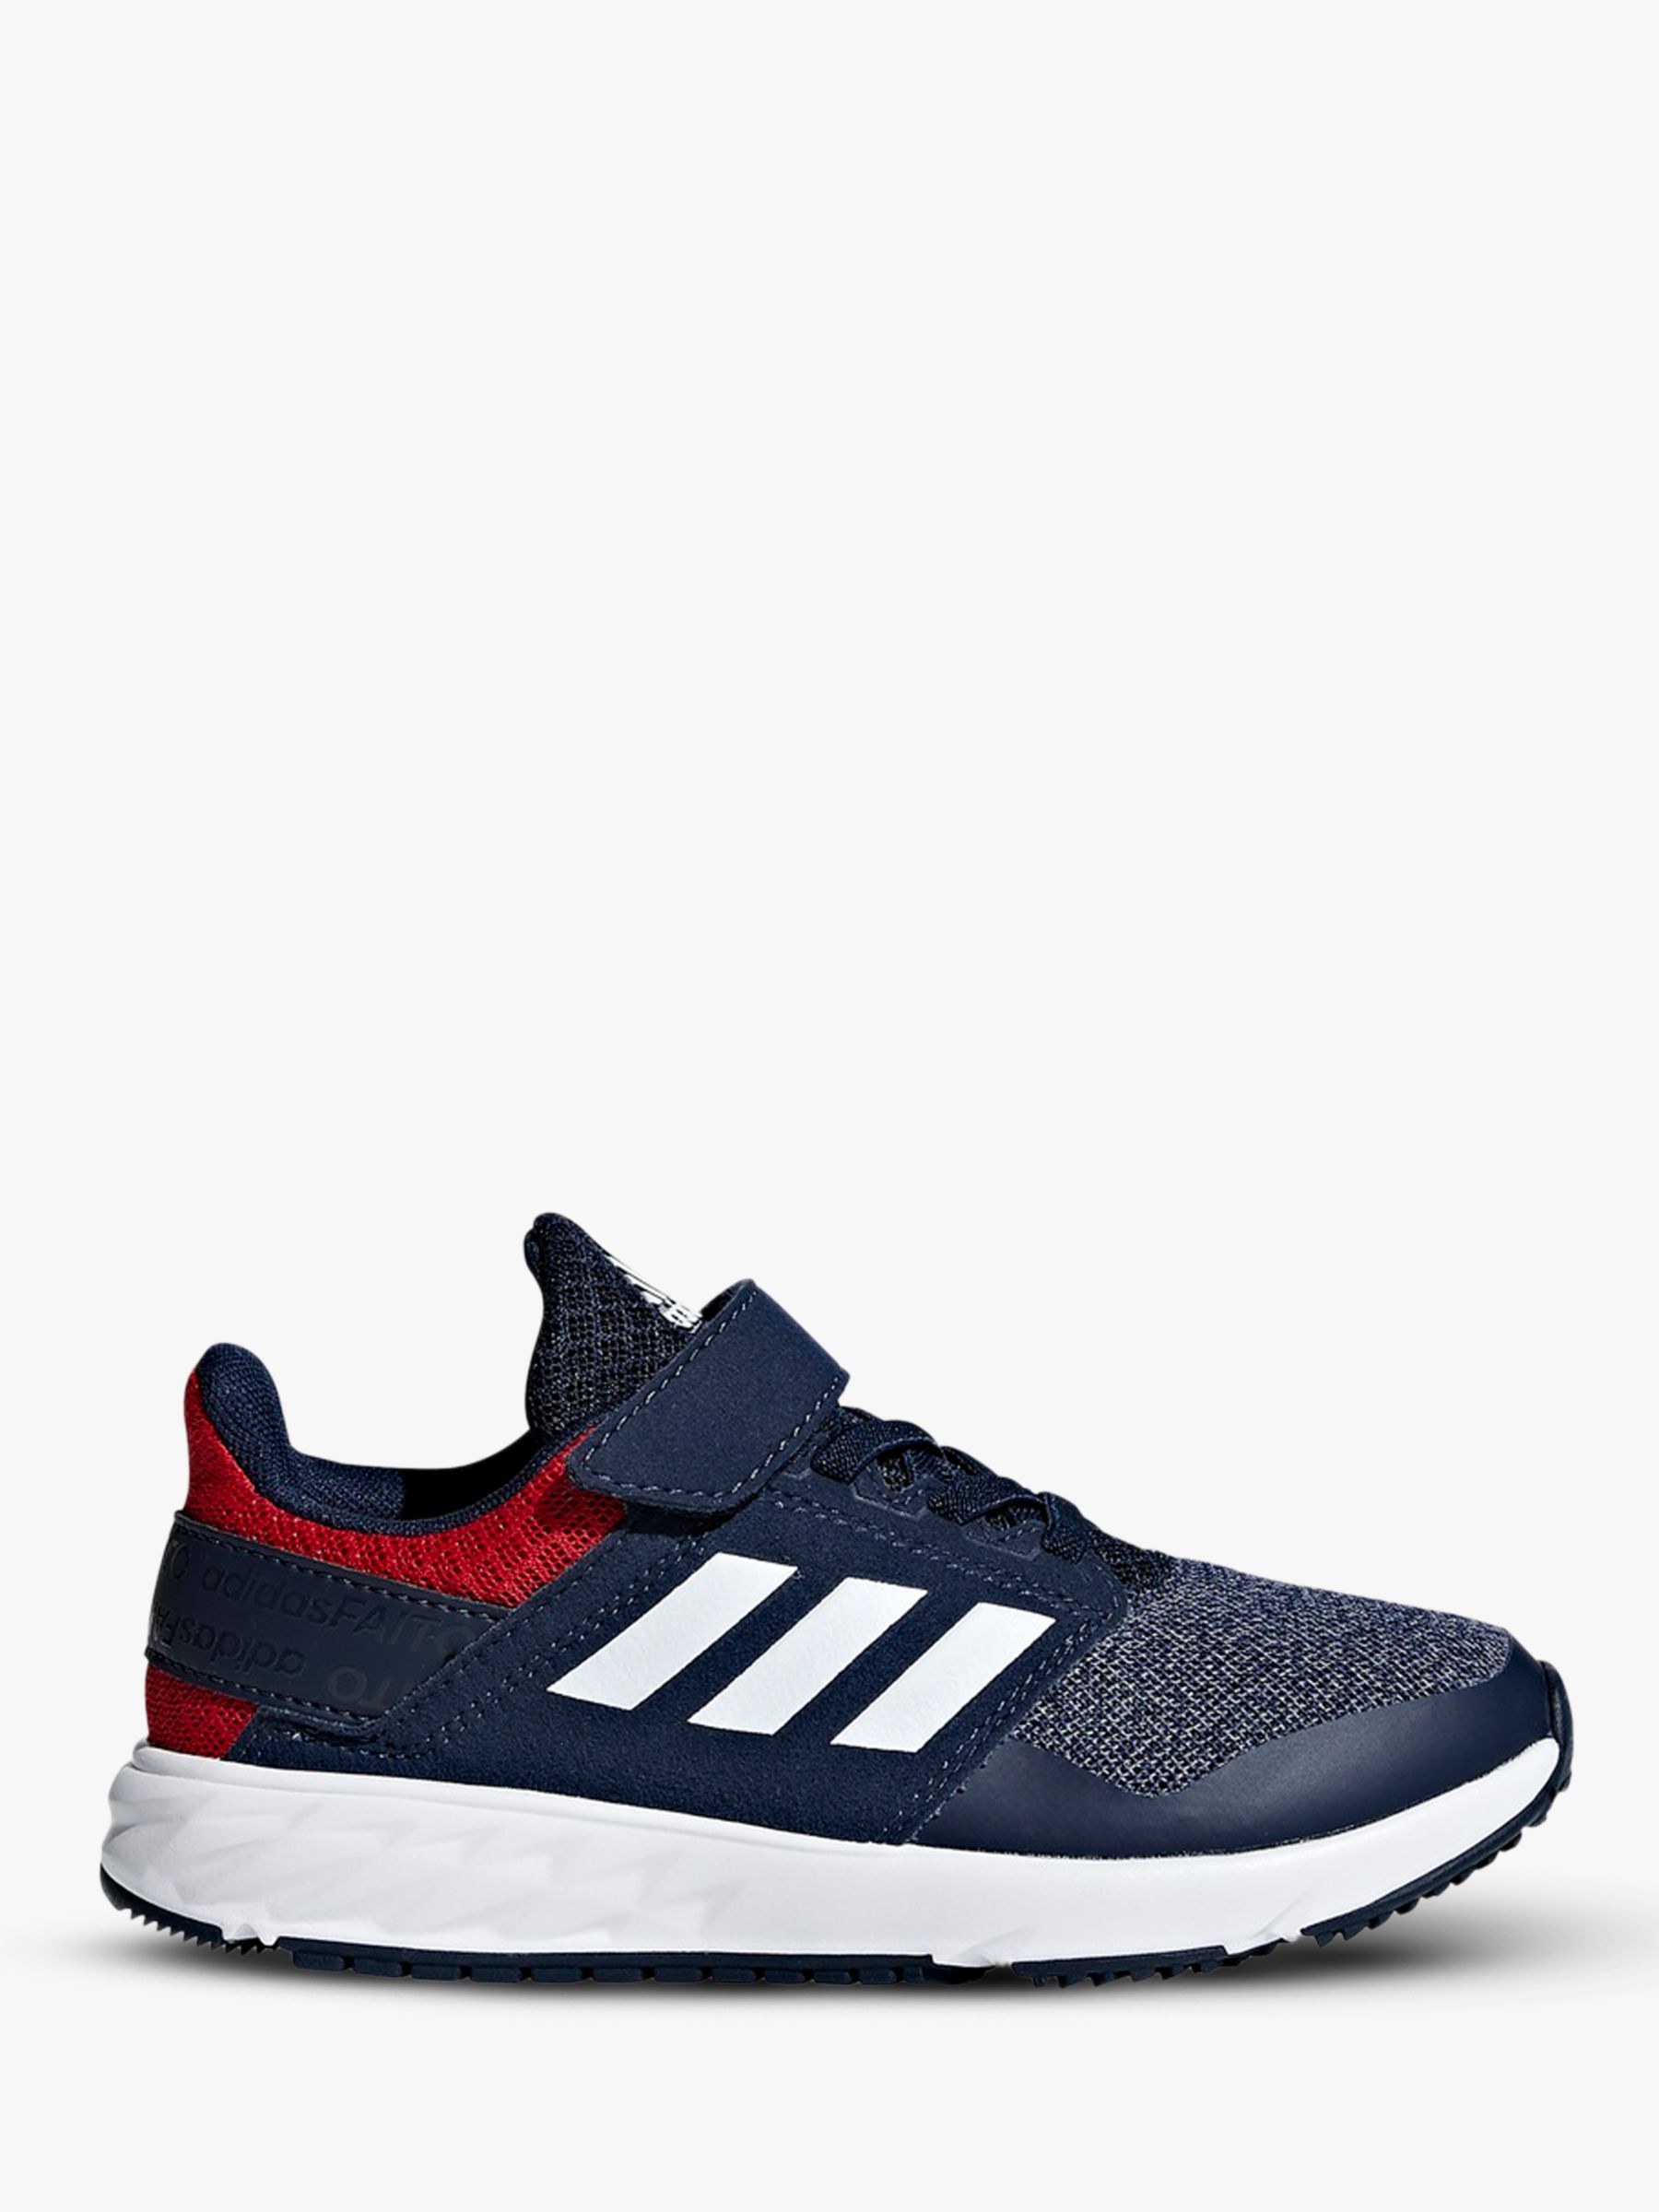 adidas childrens sneakers